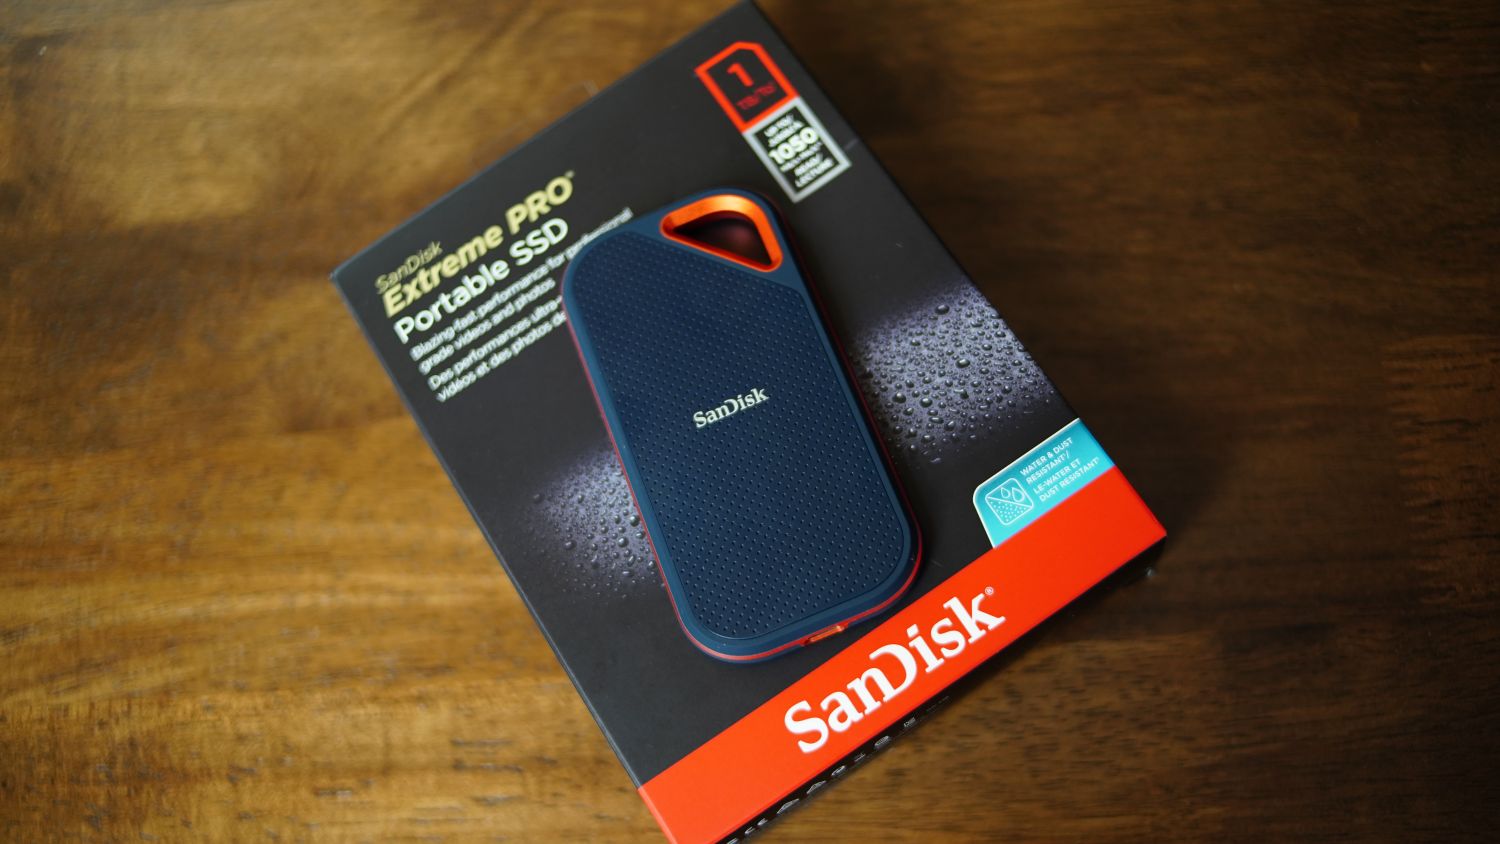 SANDISK extreme Portable SSD. SANDISK extreme Pro 1tb. SANDISK extreme Portable SSD 1tb ICO. SANDISK extreme Pro SSD 1tb.